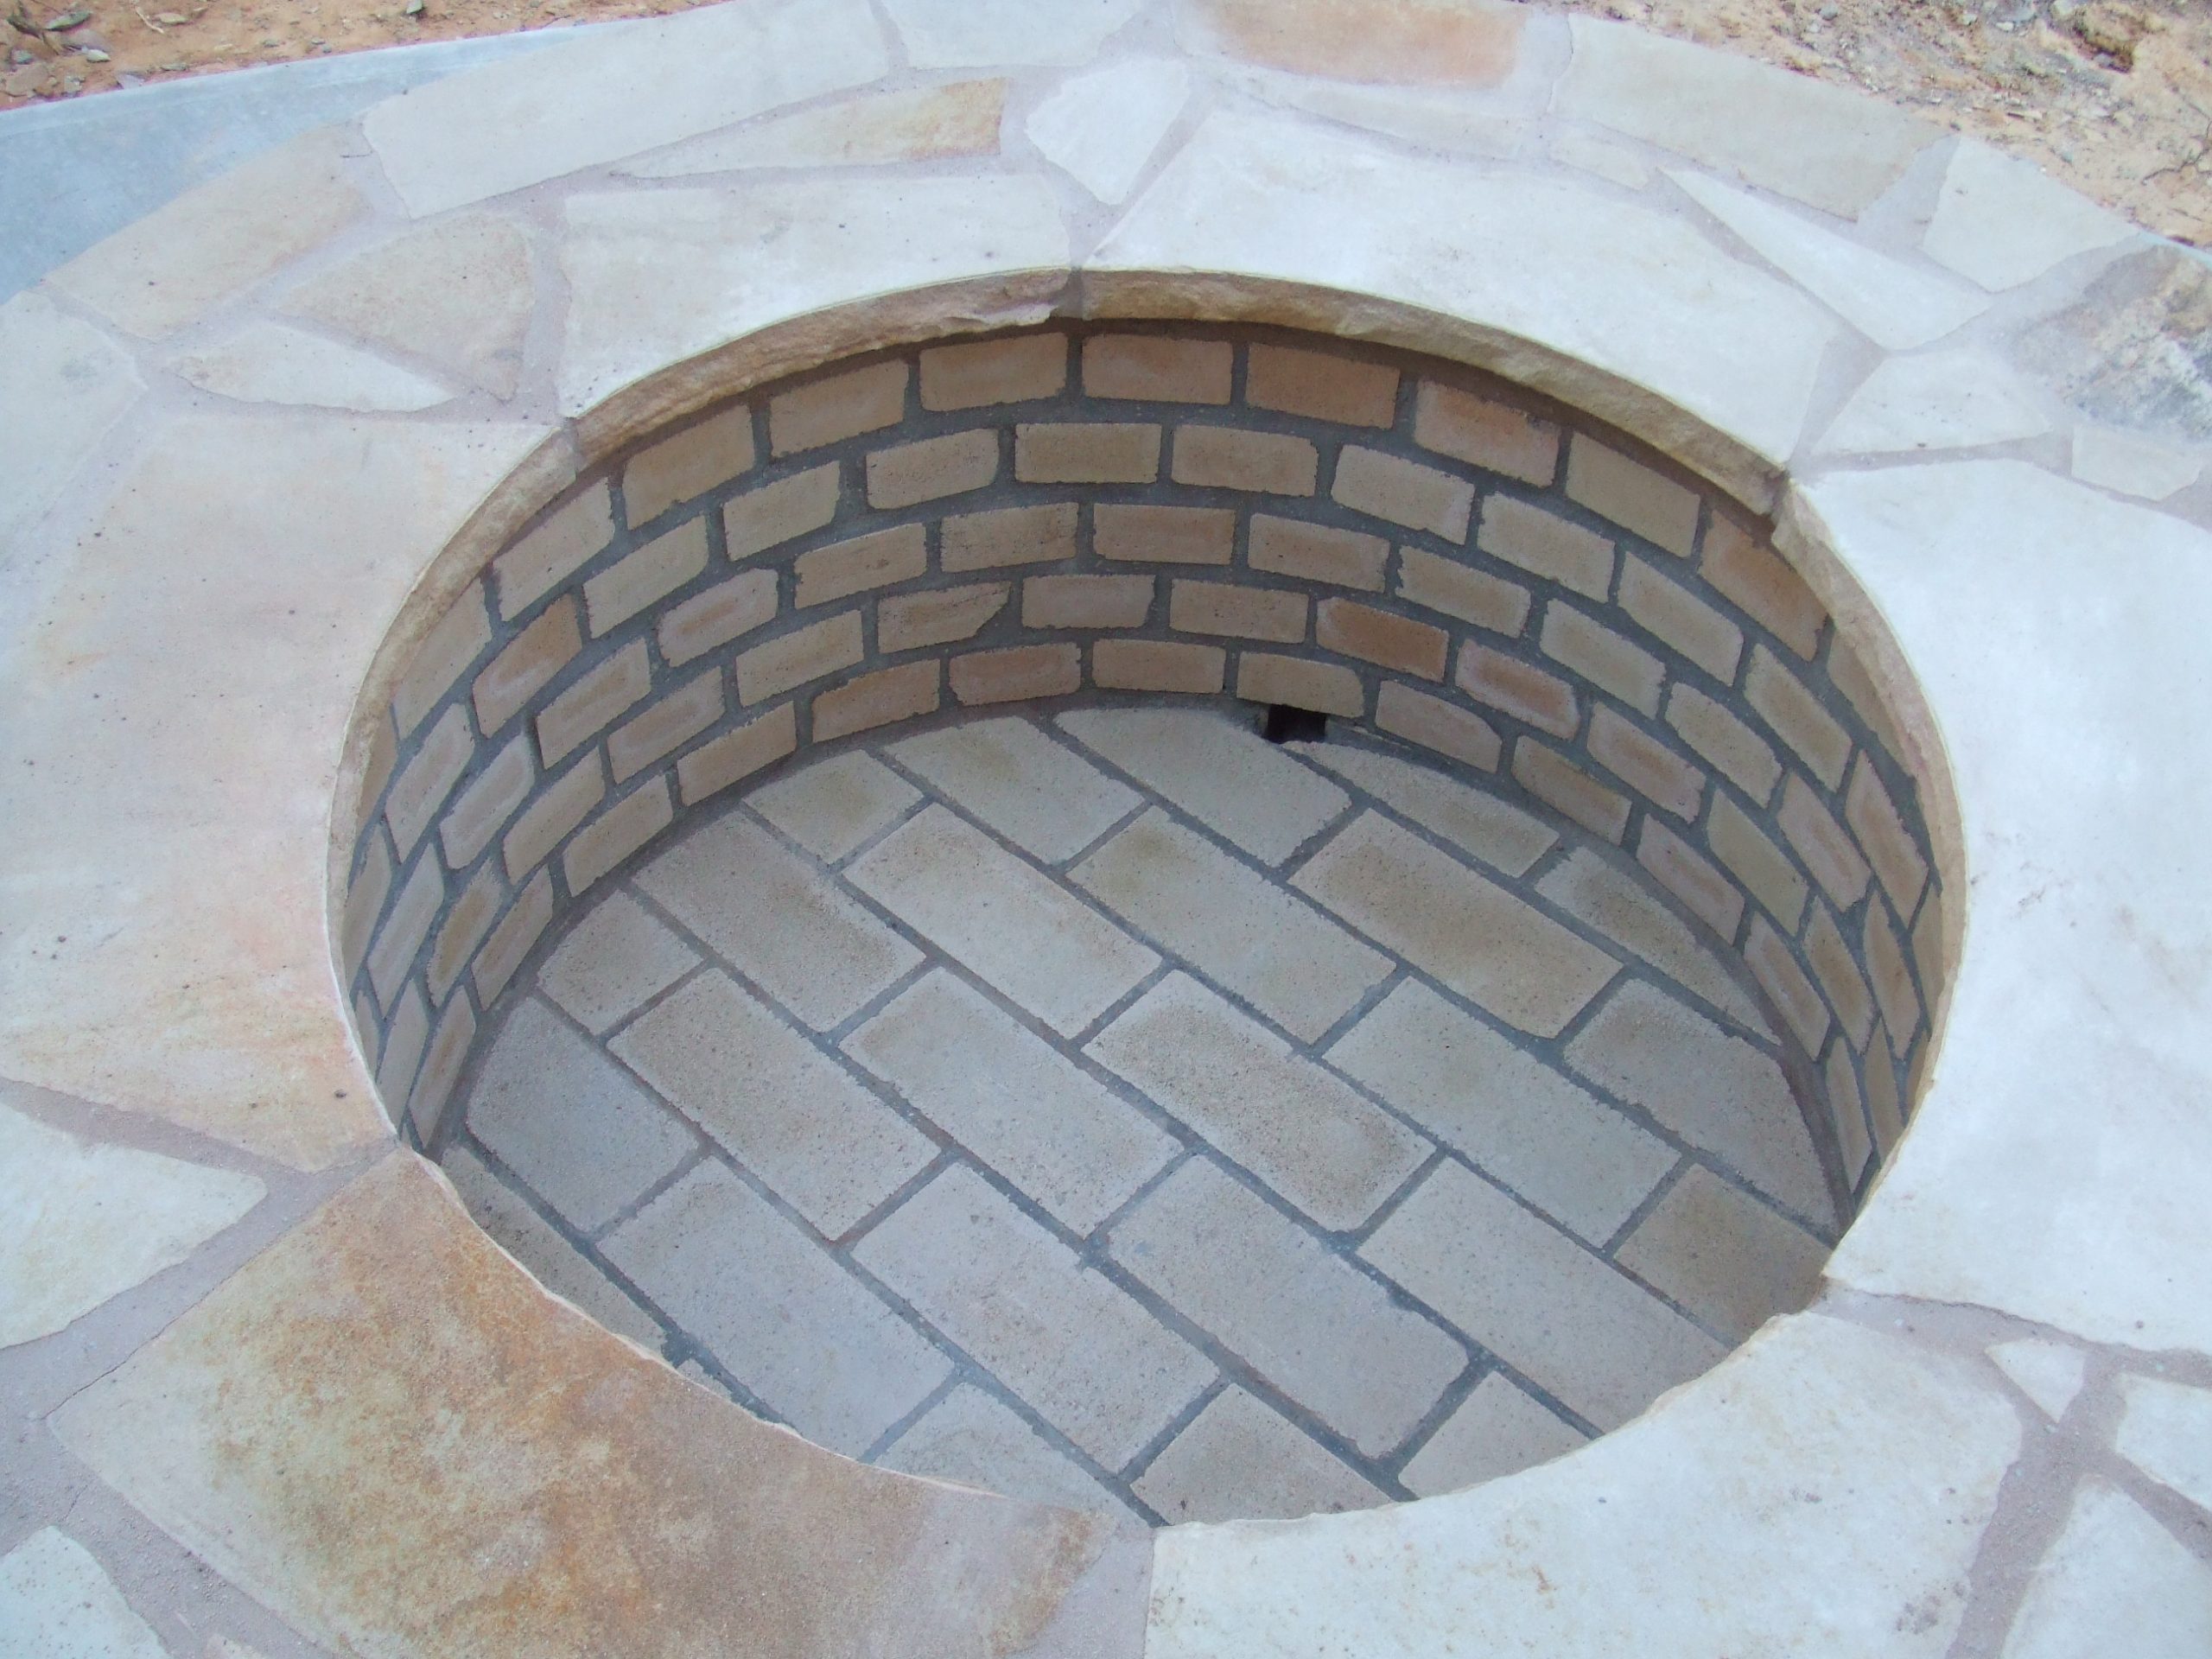 Fire Pit by Sugar Hill Outdoors